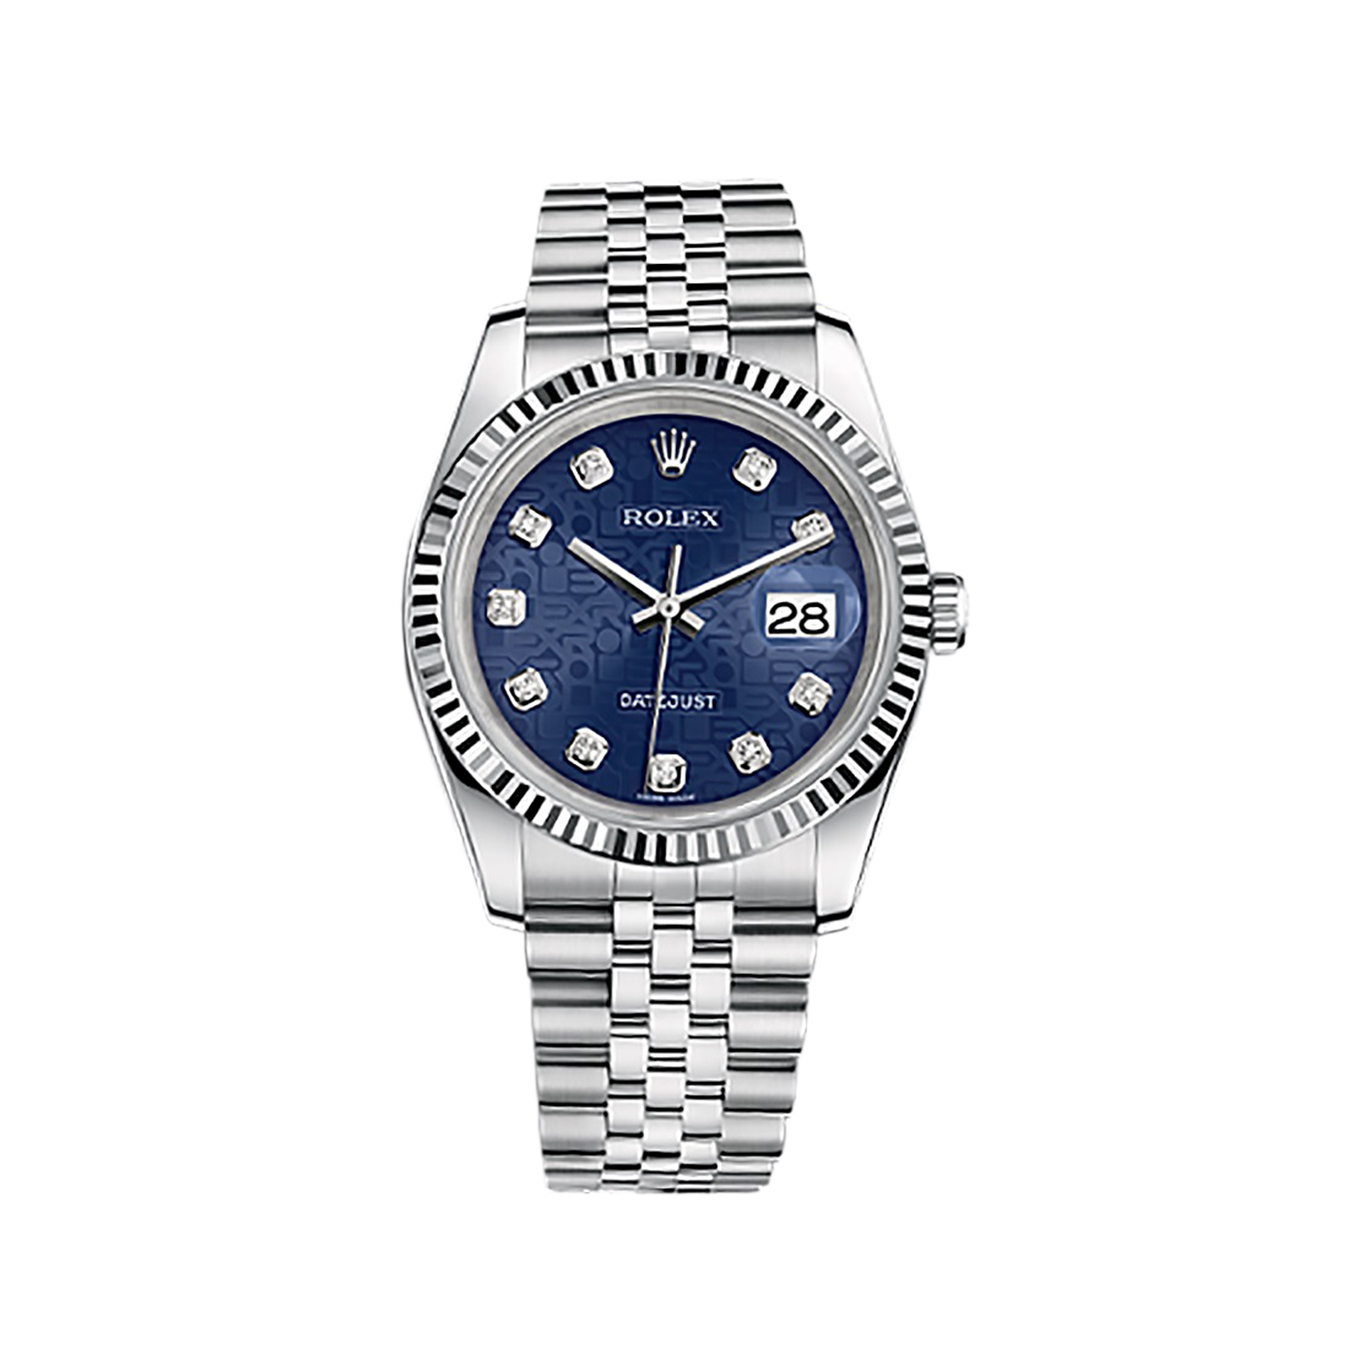 Datejust 36 116234 White Gold & Stainless Steel Watch (Blue Jubilee Design Set with Diamonds)